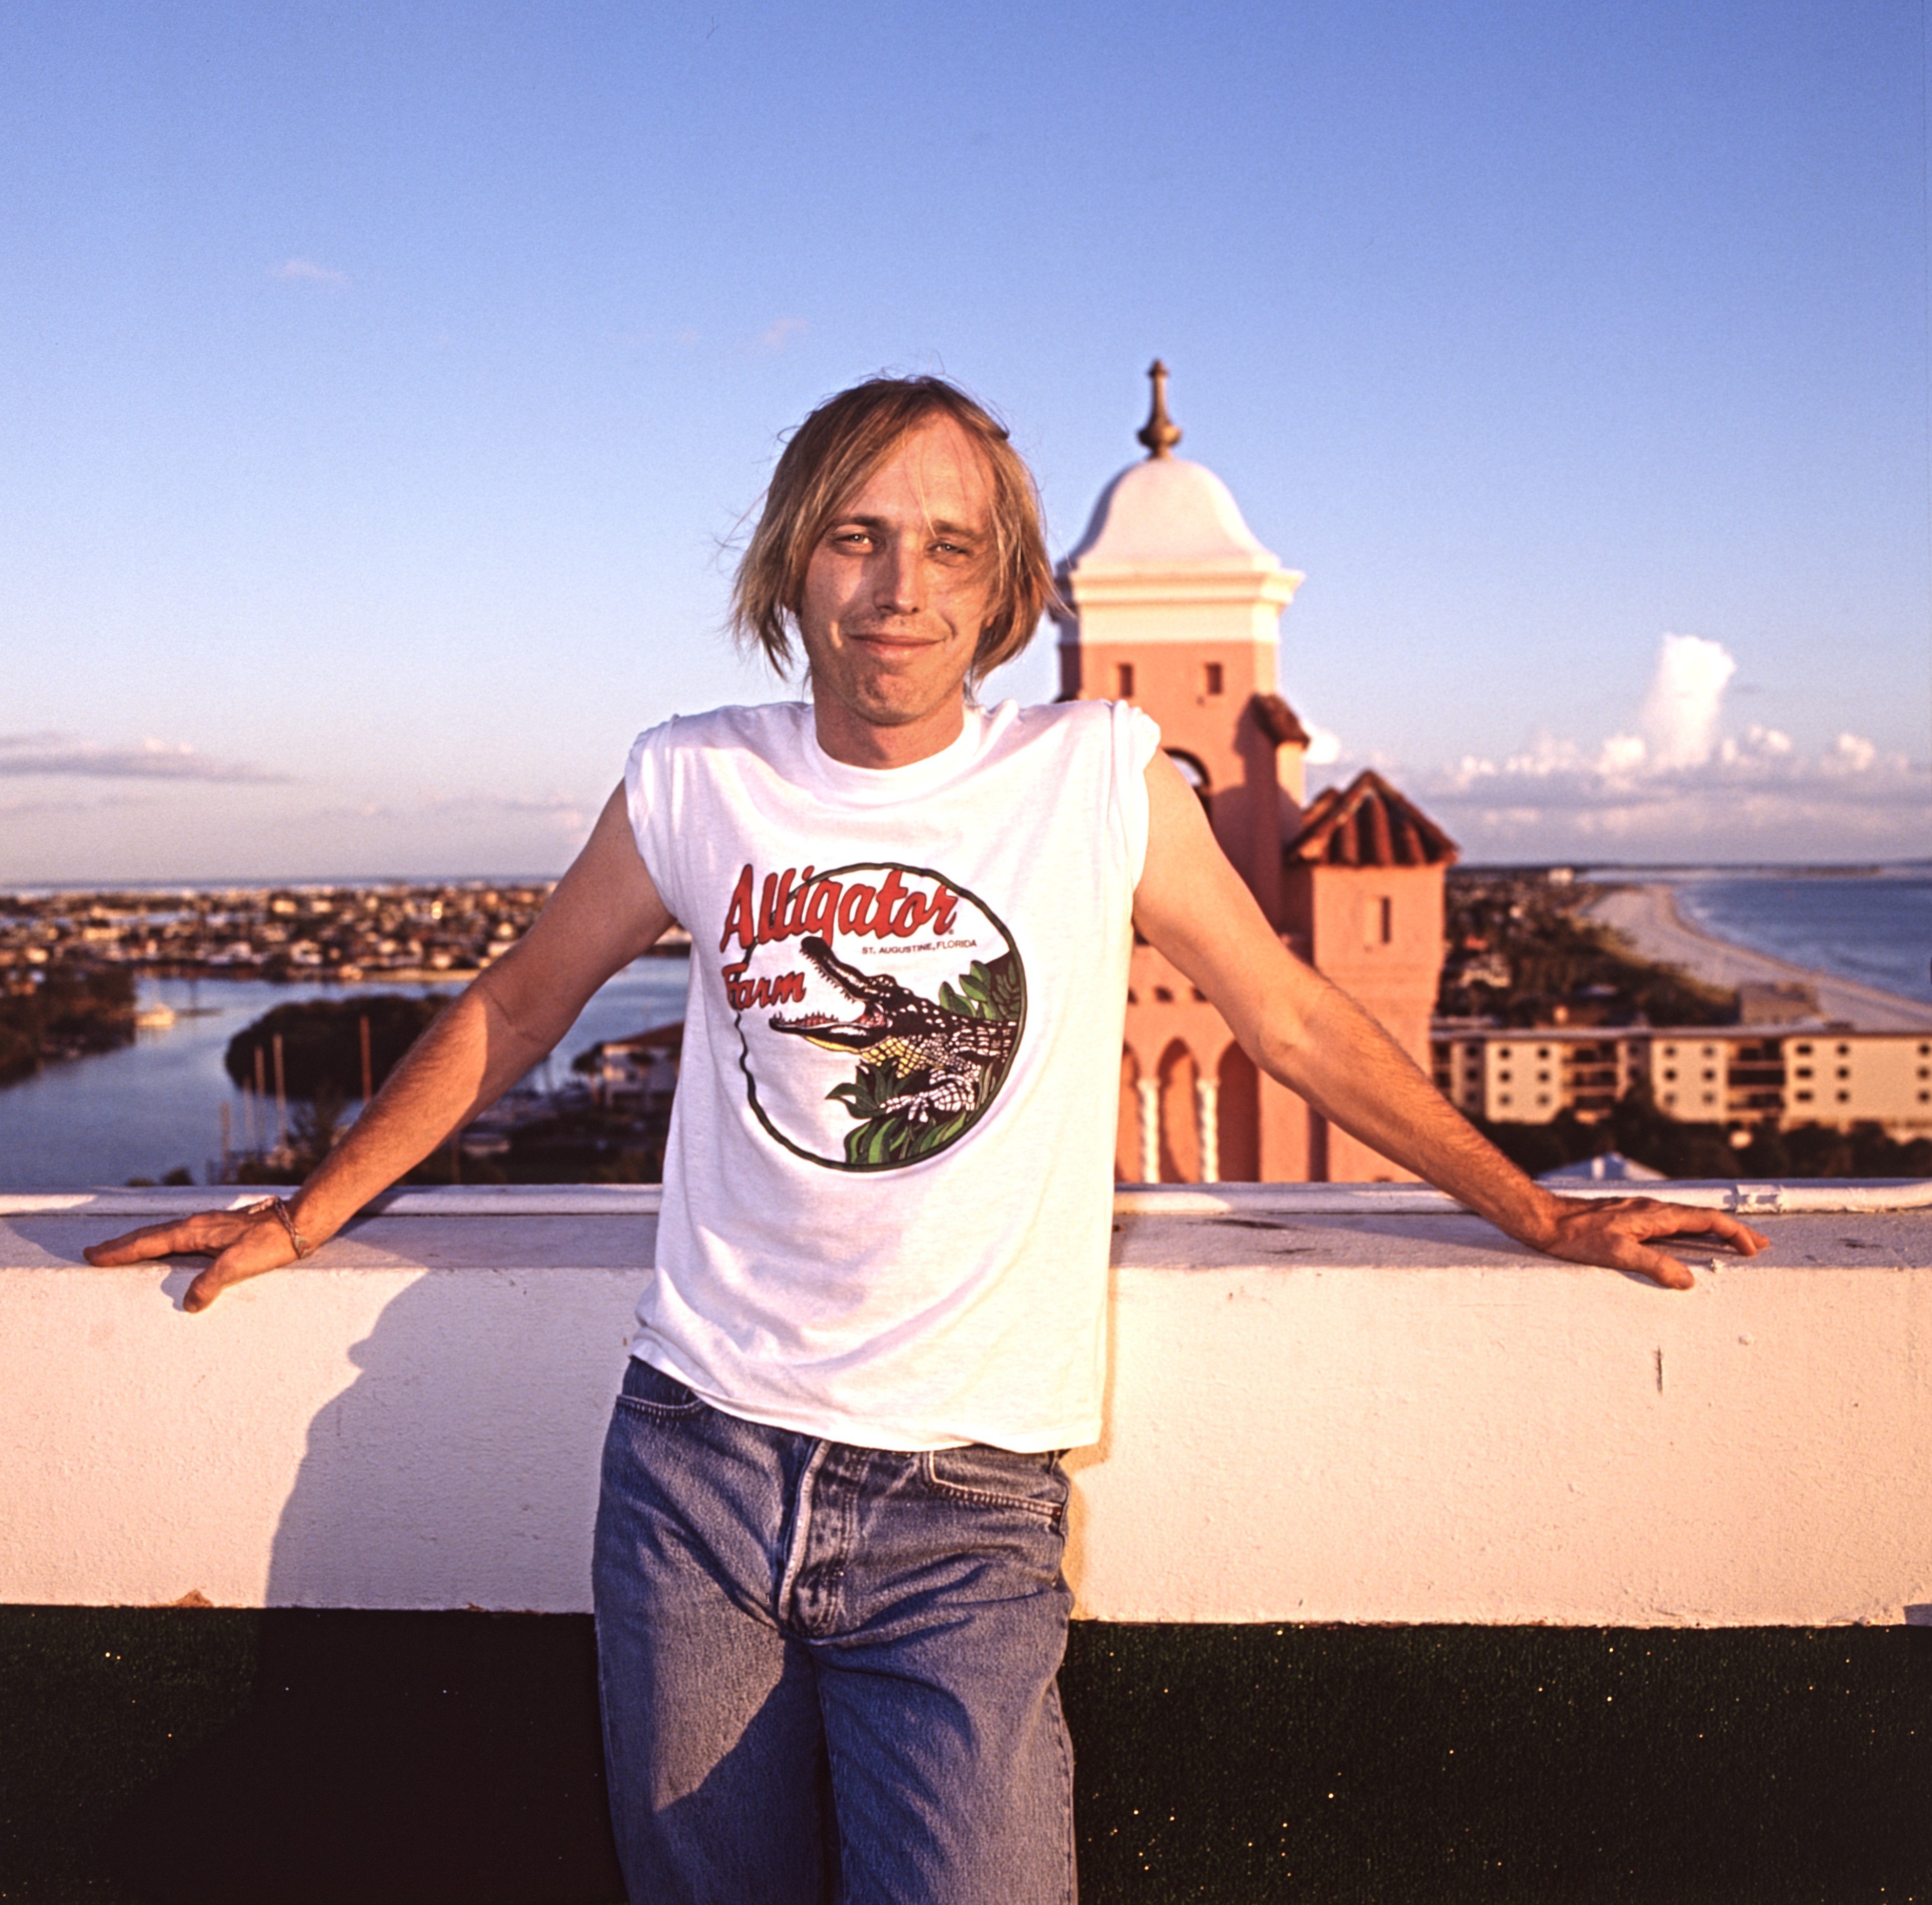 Tom Petty poses in front of a building in St. Petersburg, Florida.